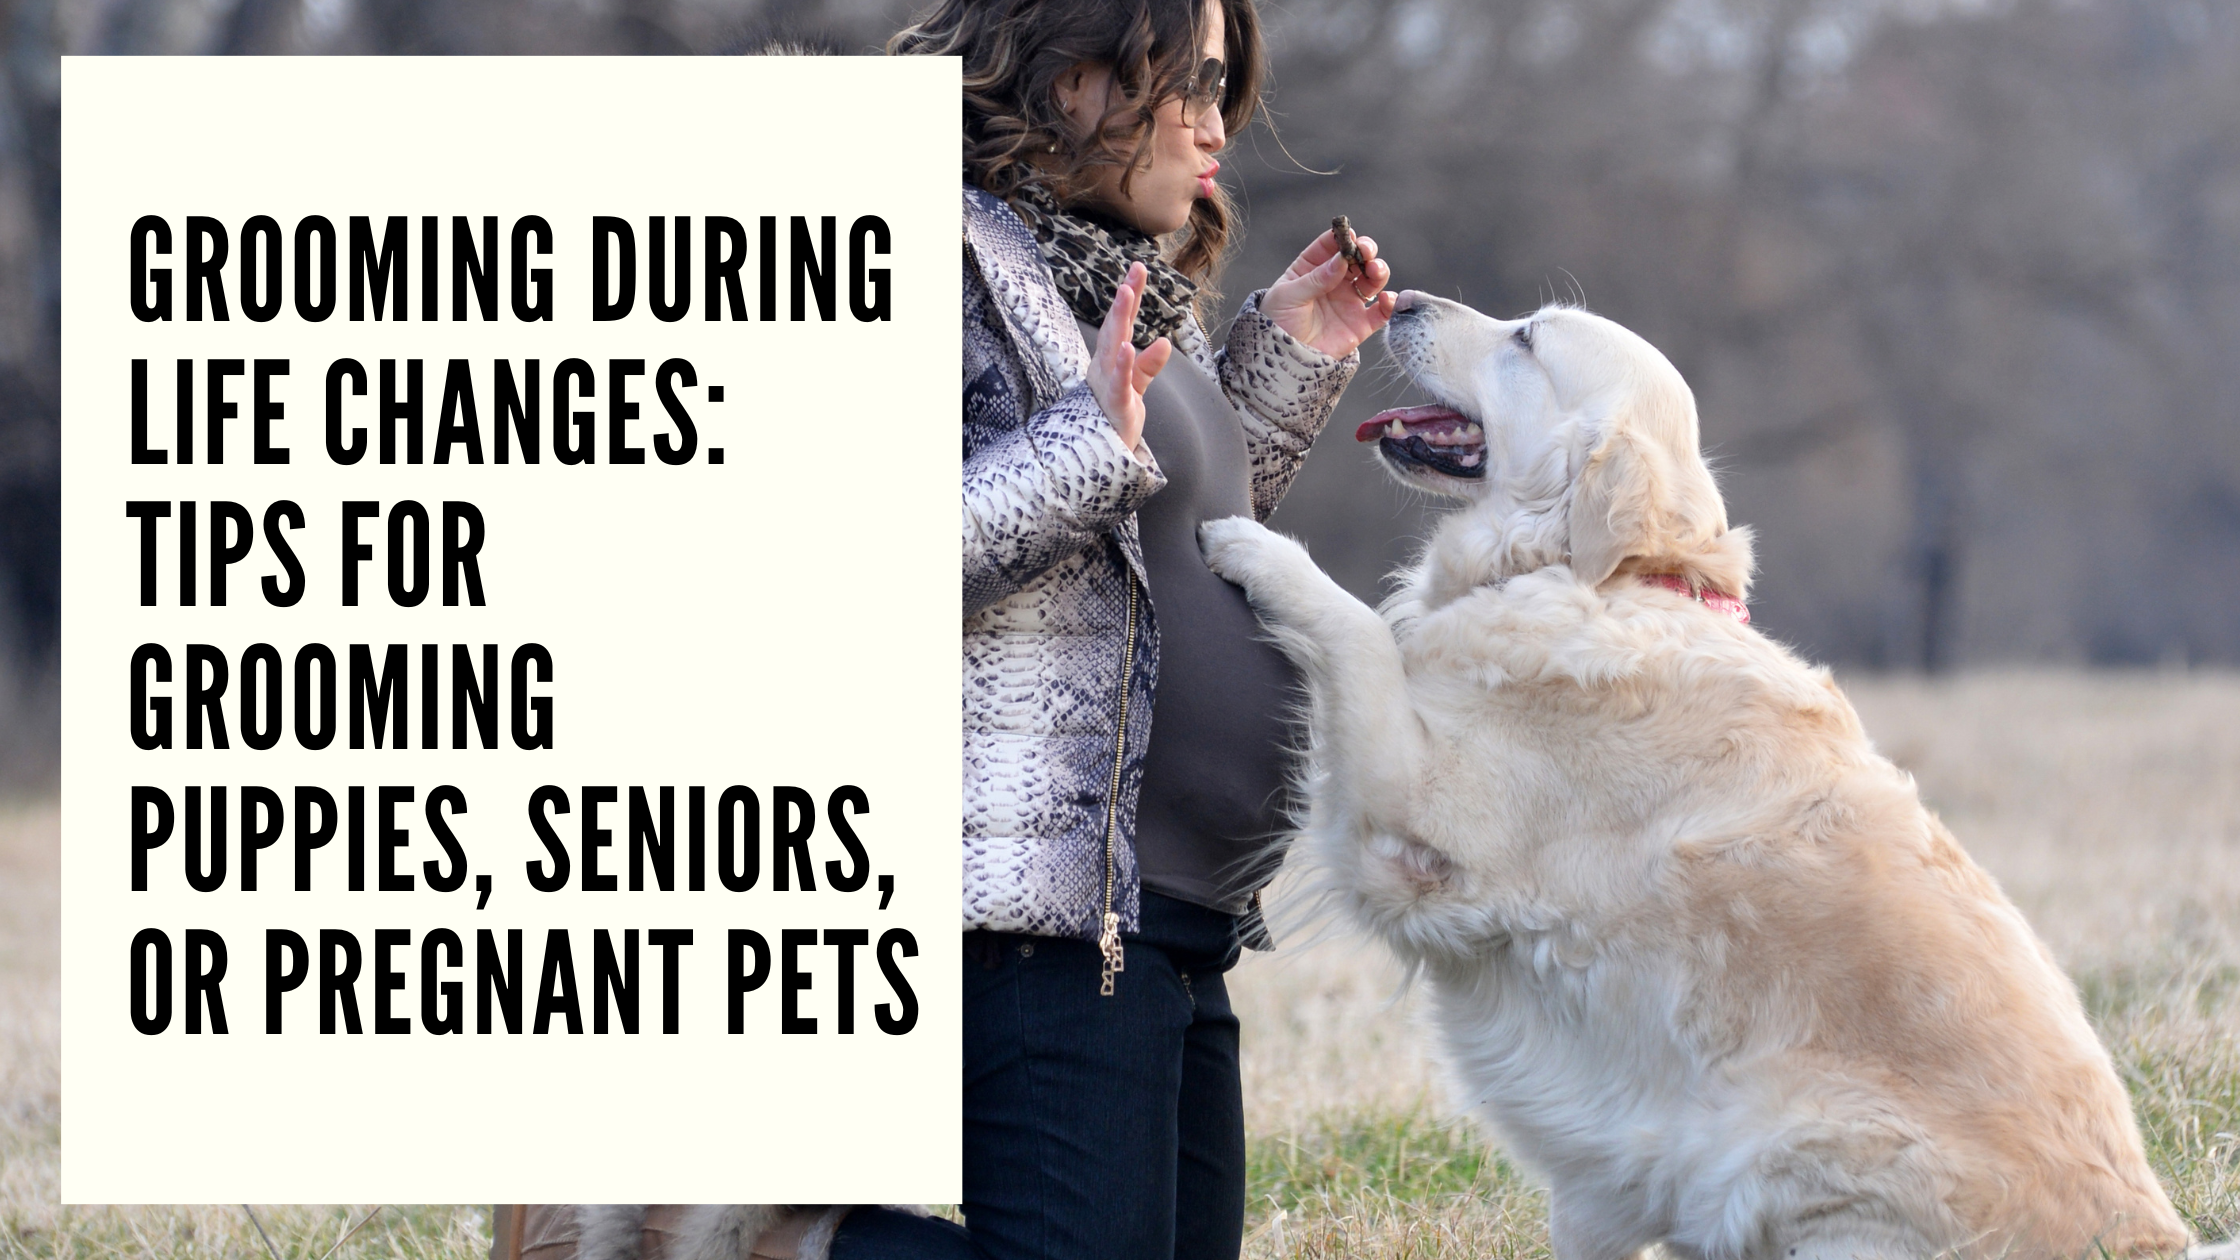 Grooming During Life Changes Tips for Grooming Puppies, Seniors, or Pregnant Pets